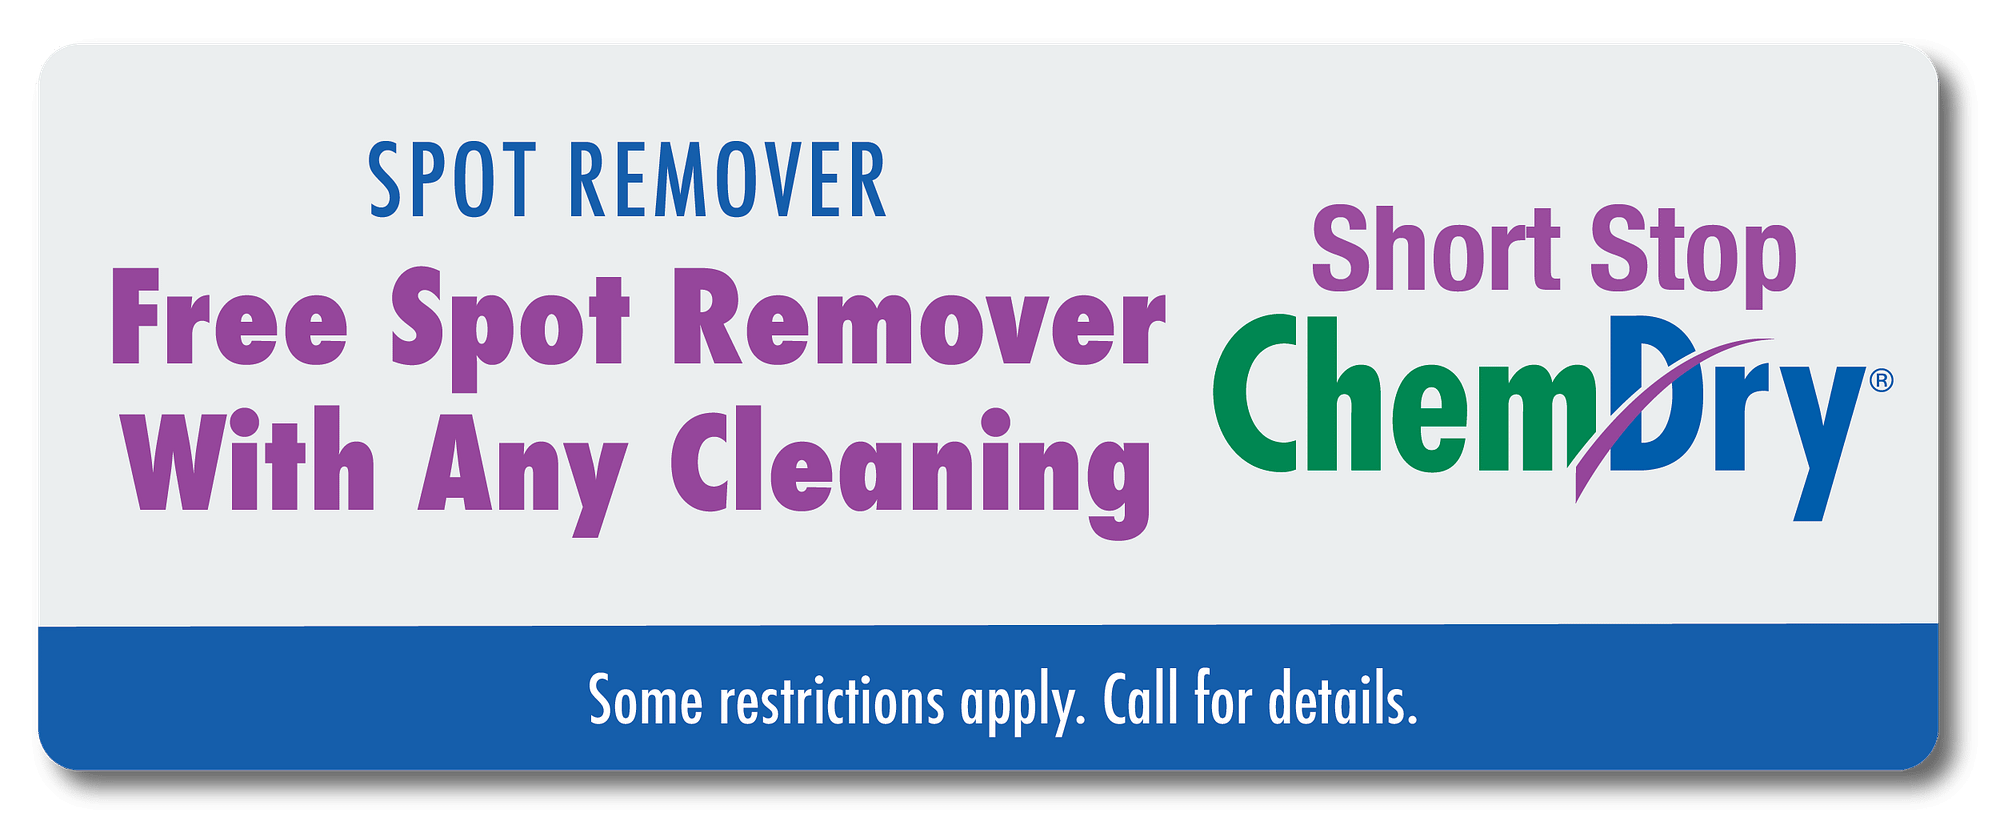 free spot remover with any cleaning